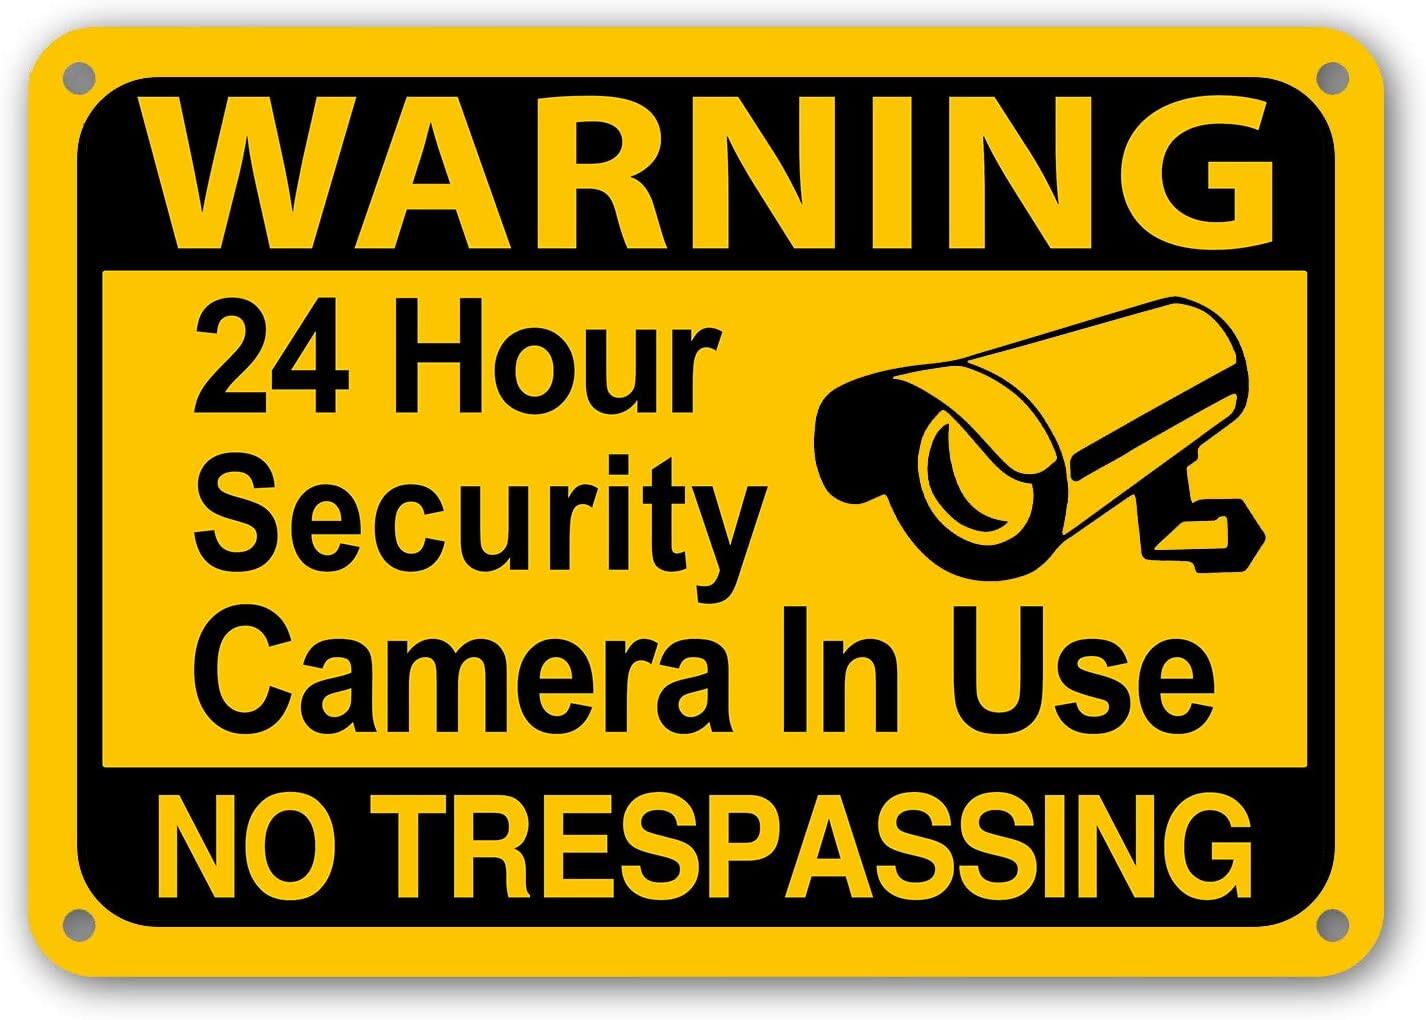 mysignboards-24-hour-surveillance-yellow-signs-home-security-warning